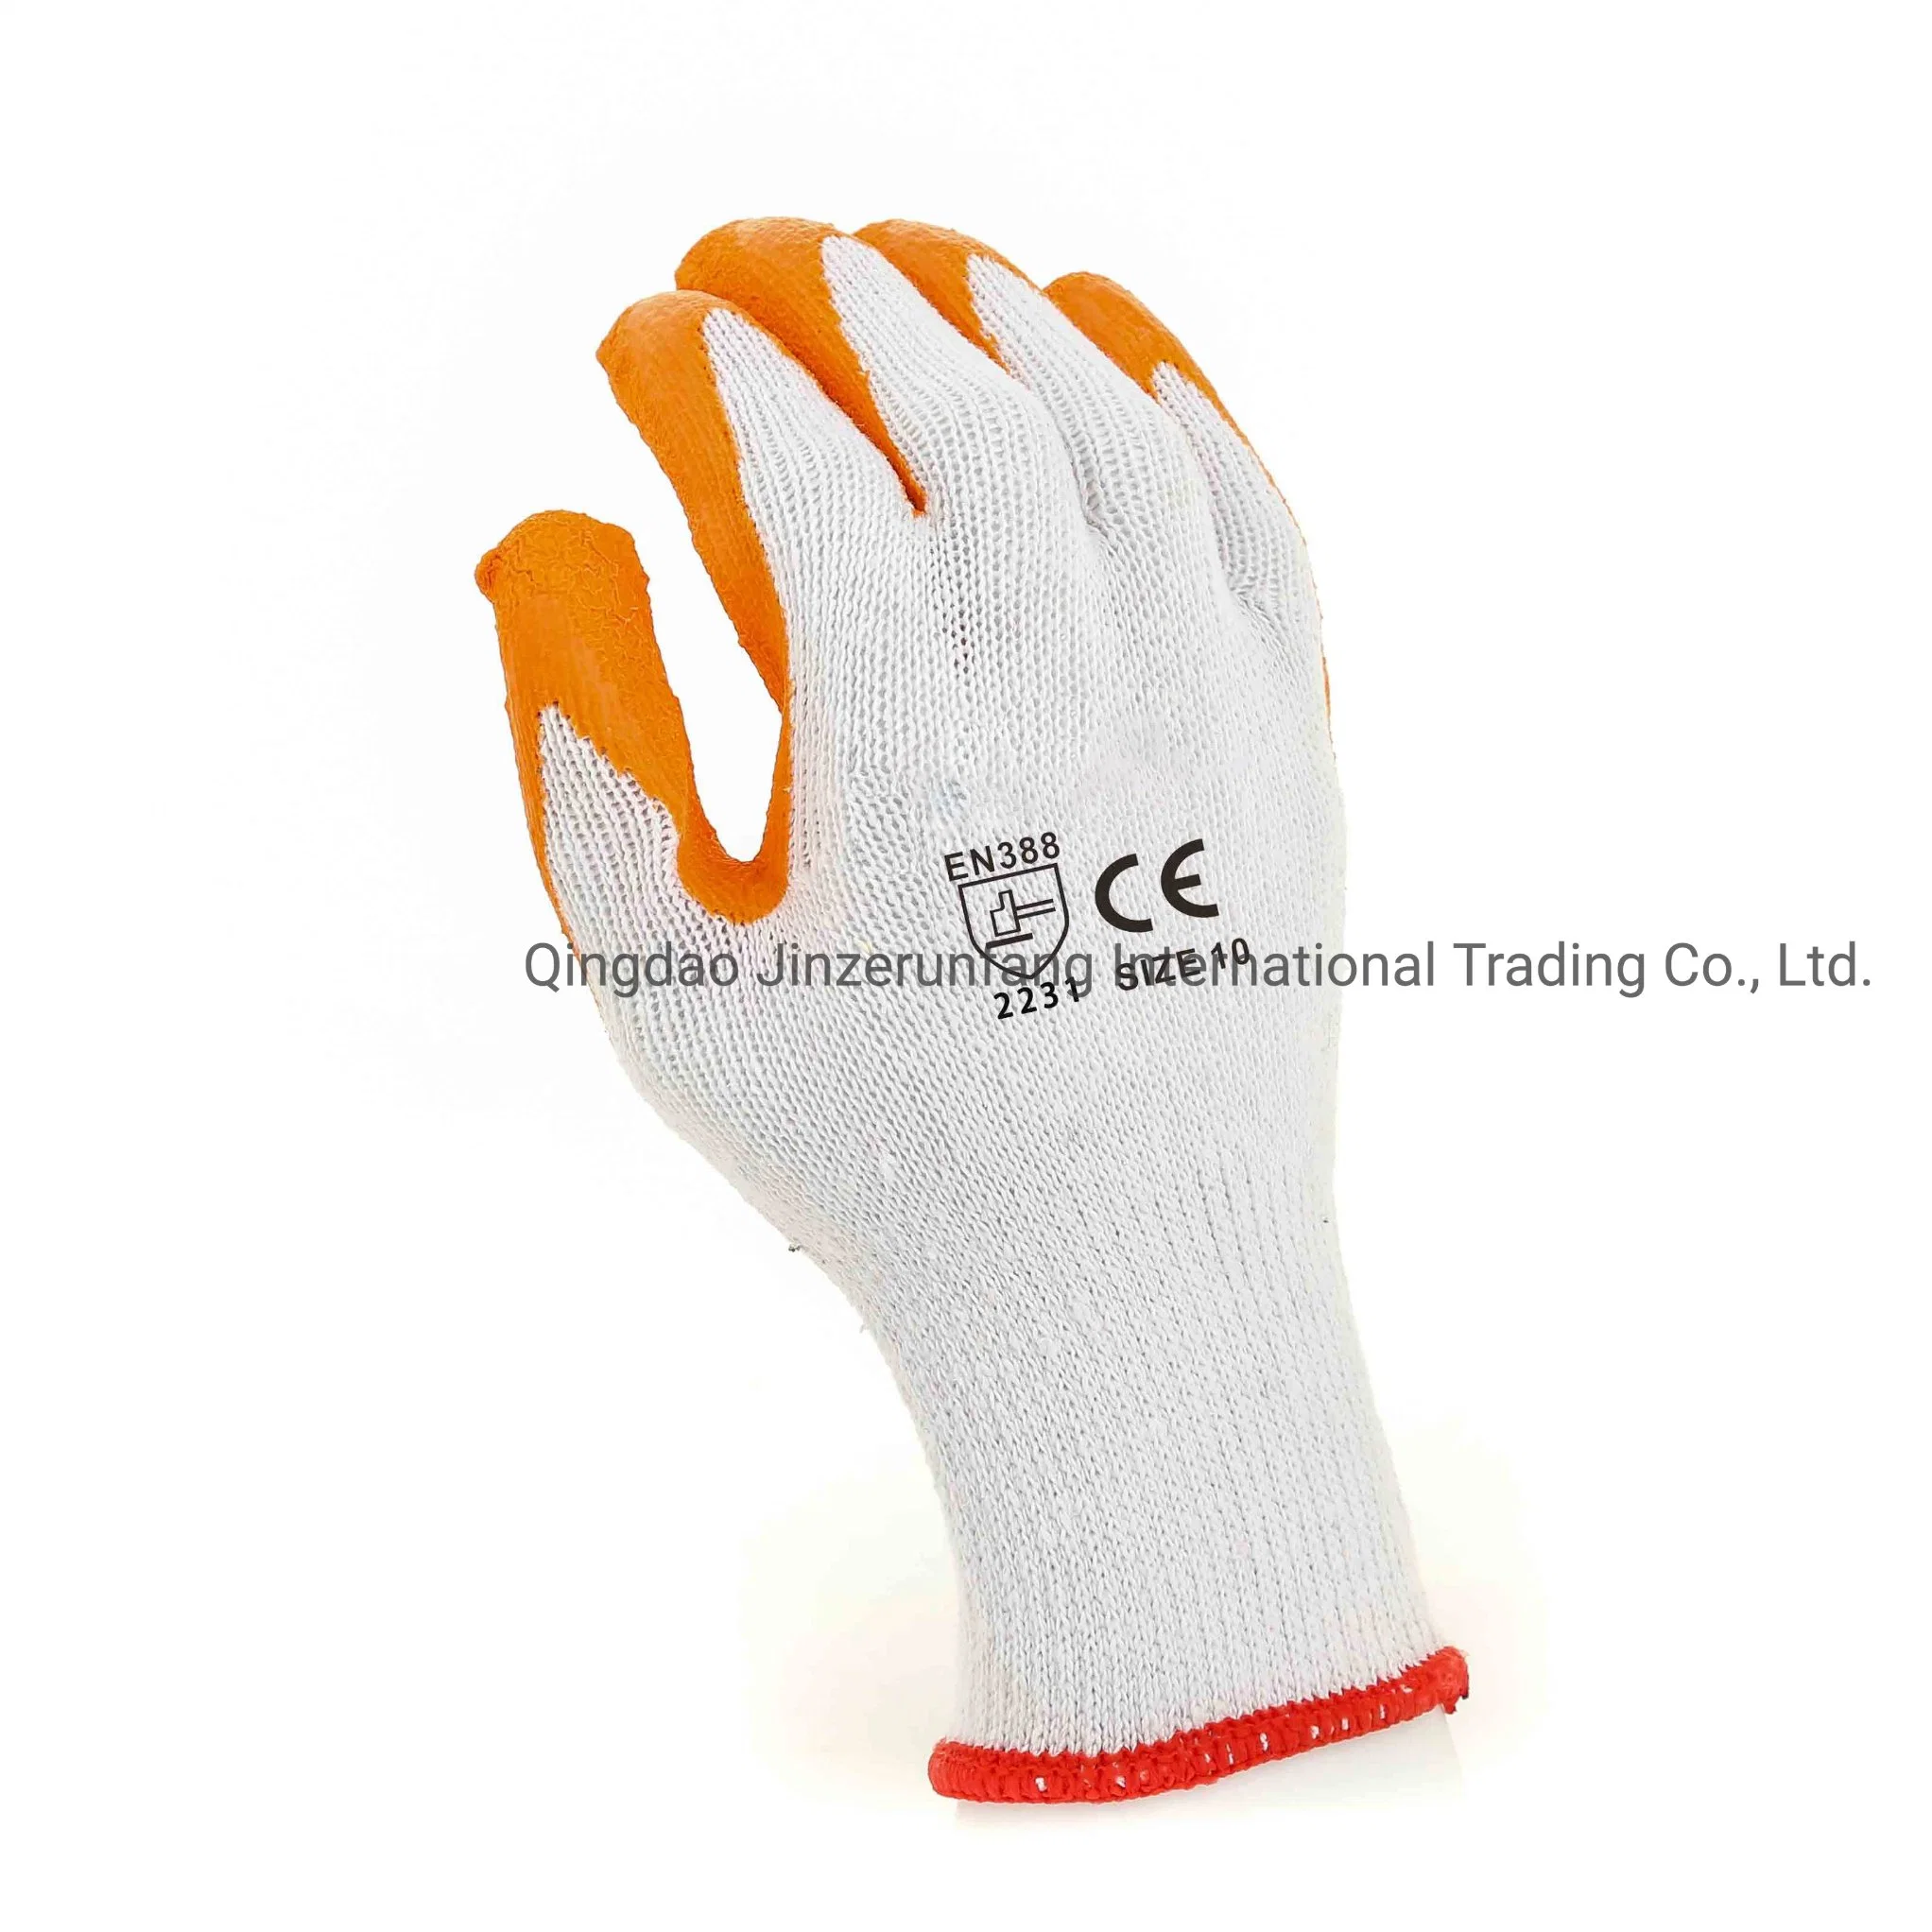 Orange Latex 10g White Polyester Crinkle Coated Labor Protective En388 Construction Mechanical Industrial Safety Work Gloves